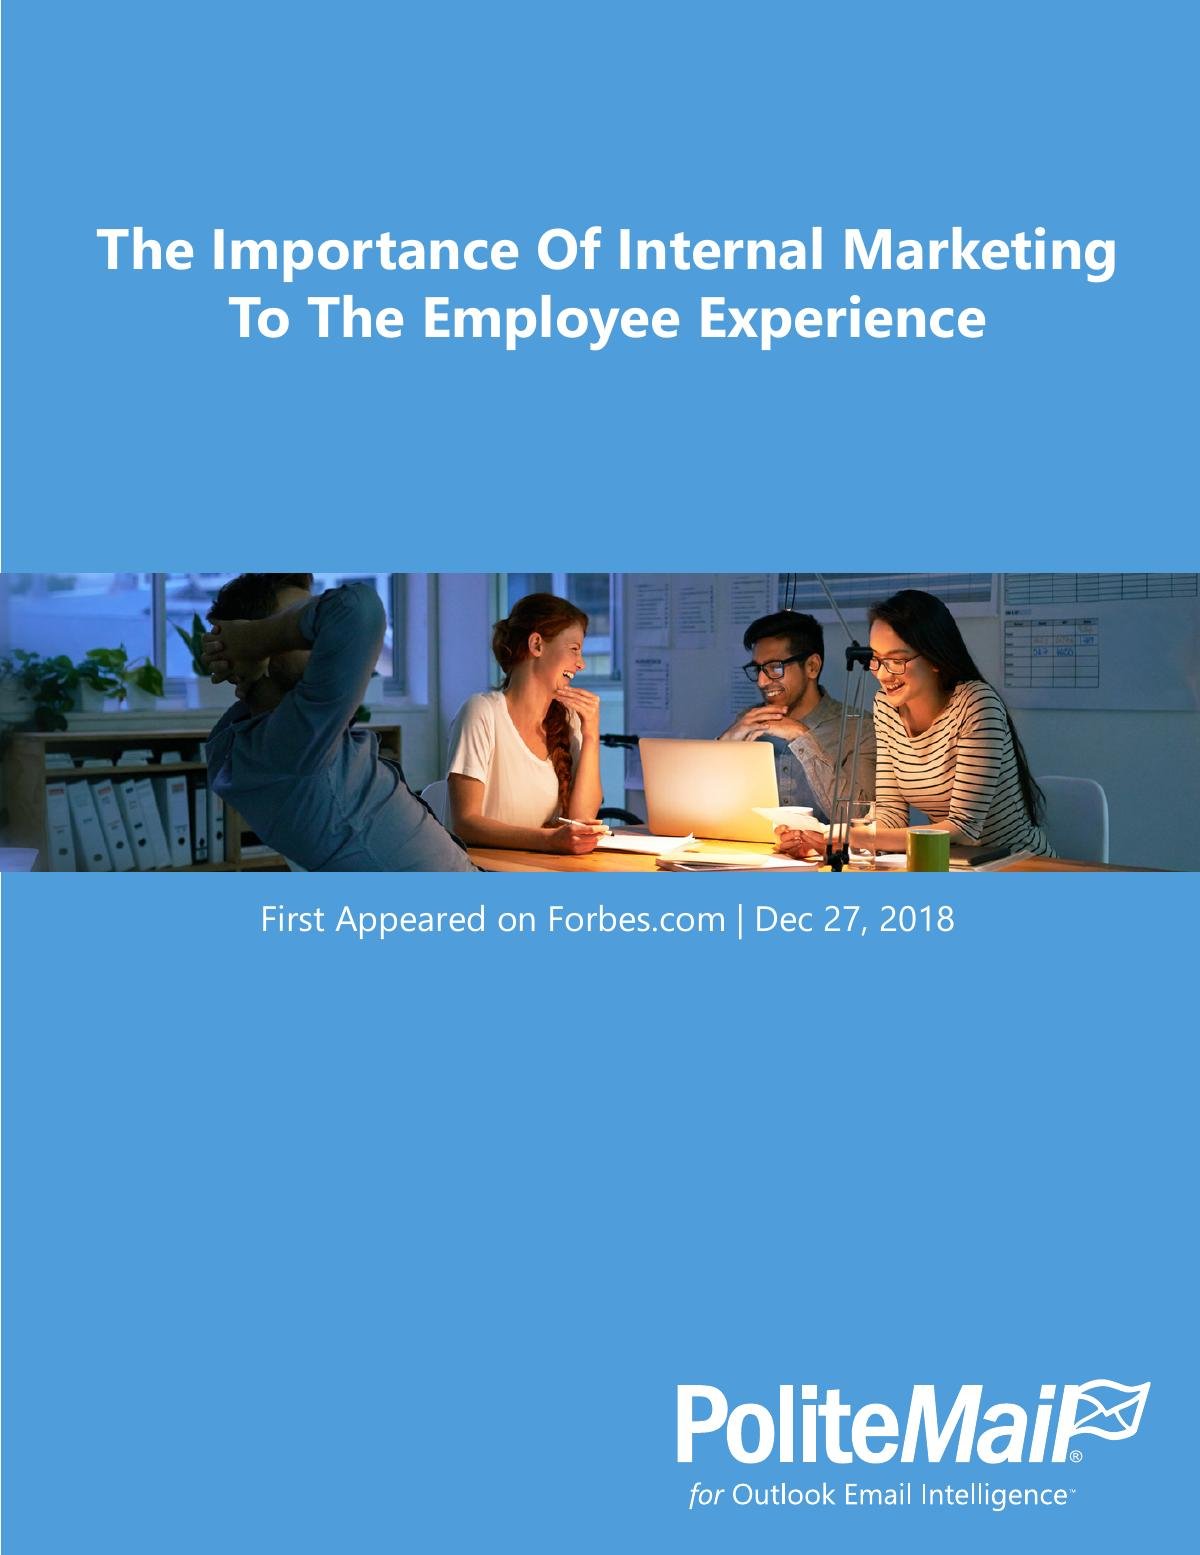 The Importance Of Internal Marketing To The Employee Experience